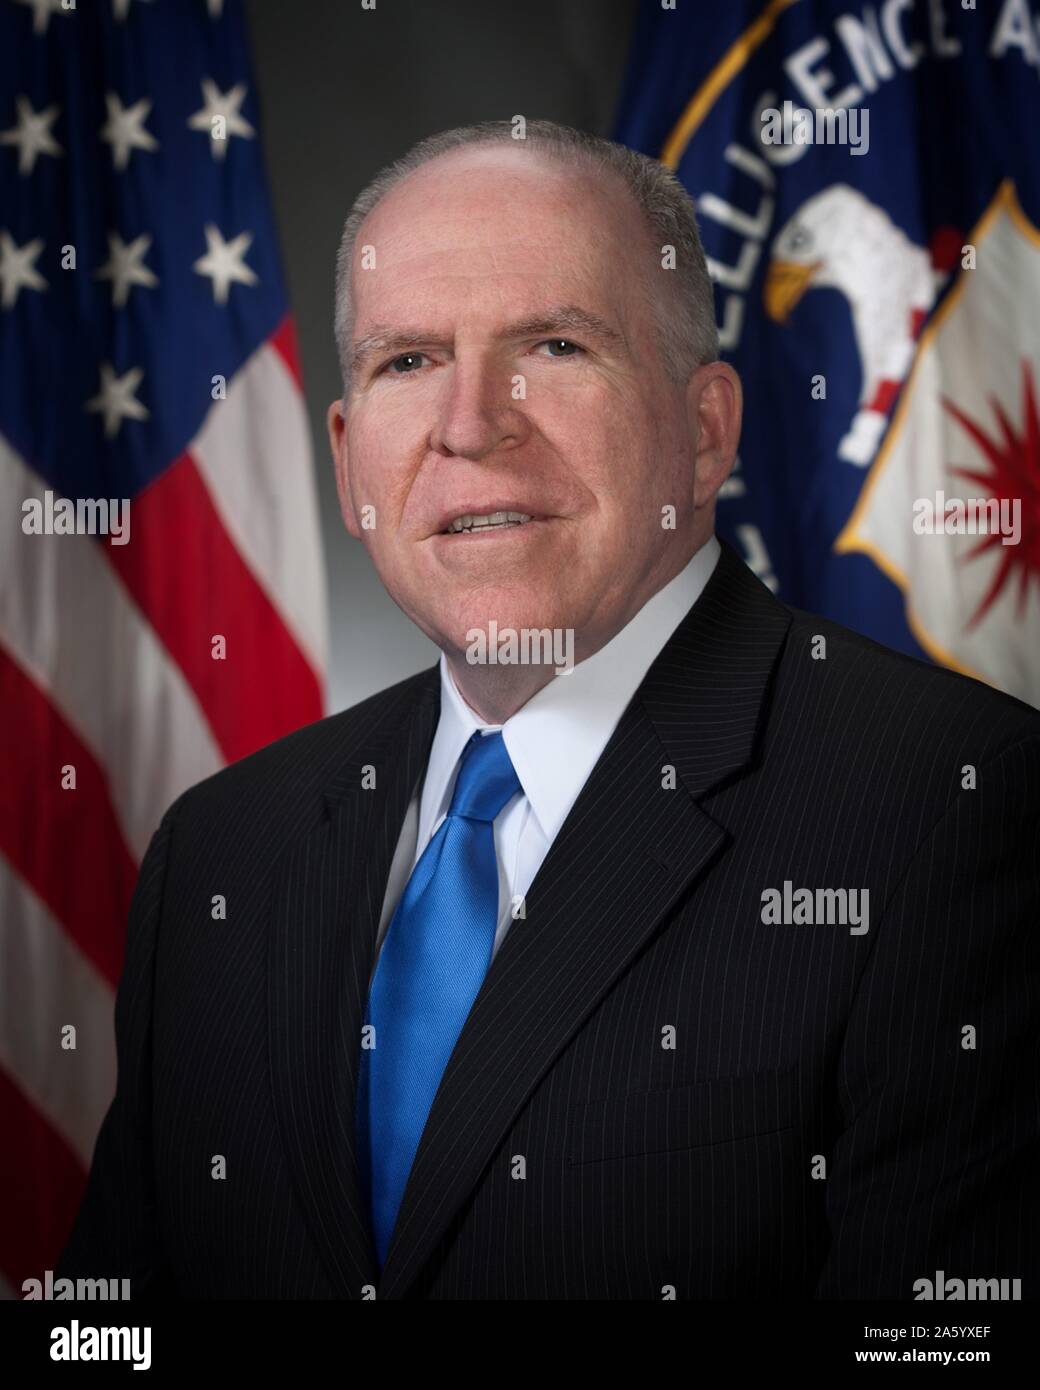 Photograph of John O. Brennan (1955-) an American government official and Director of the Central Intelligence Agency. Dated 2013 Stock Photo